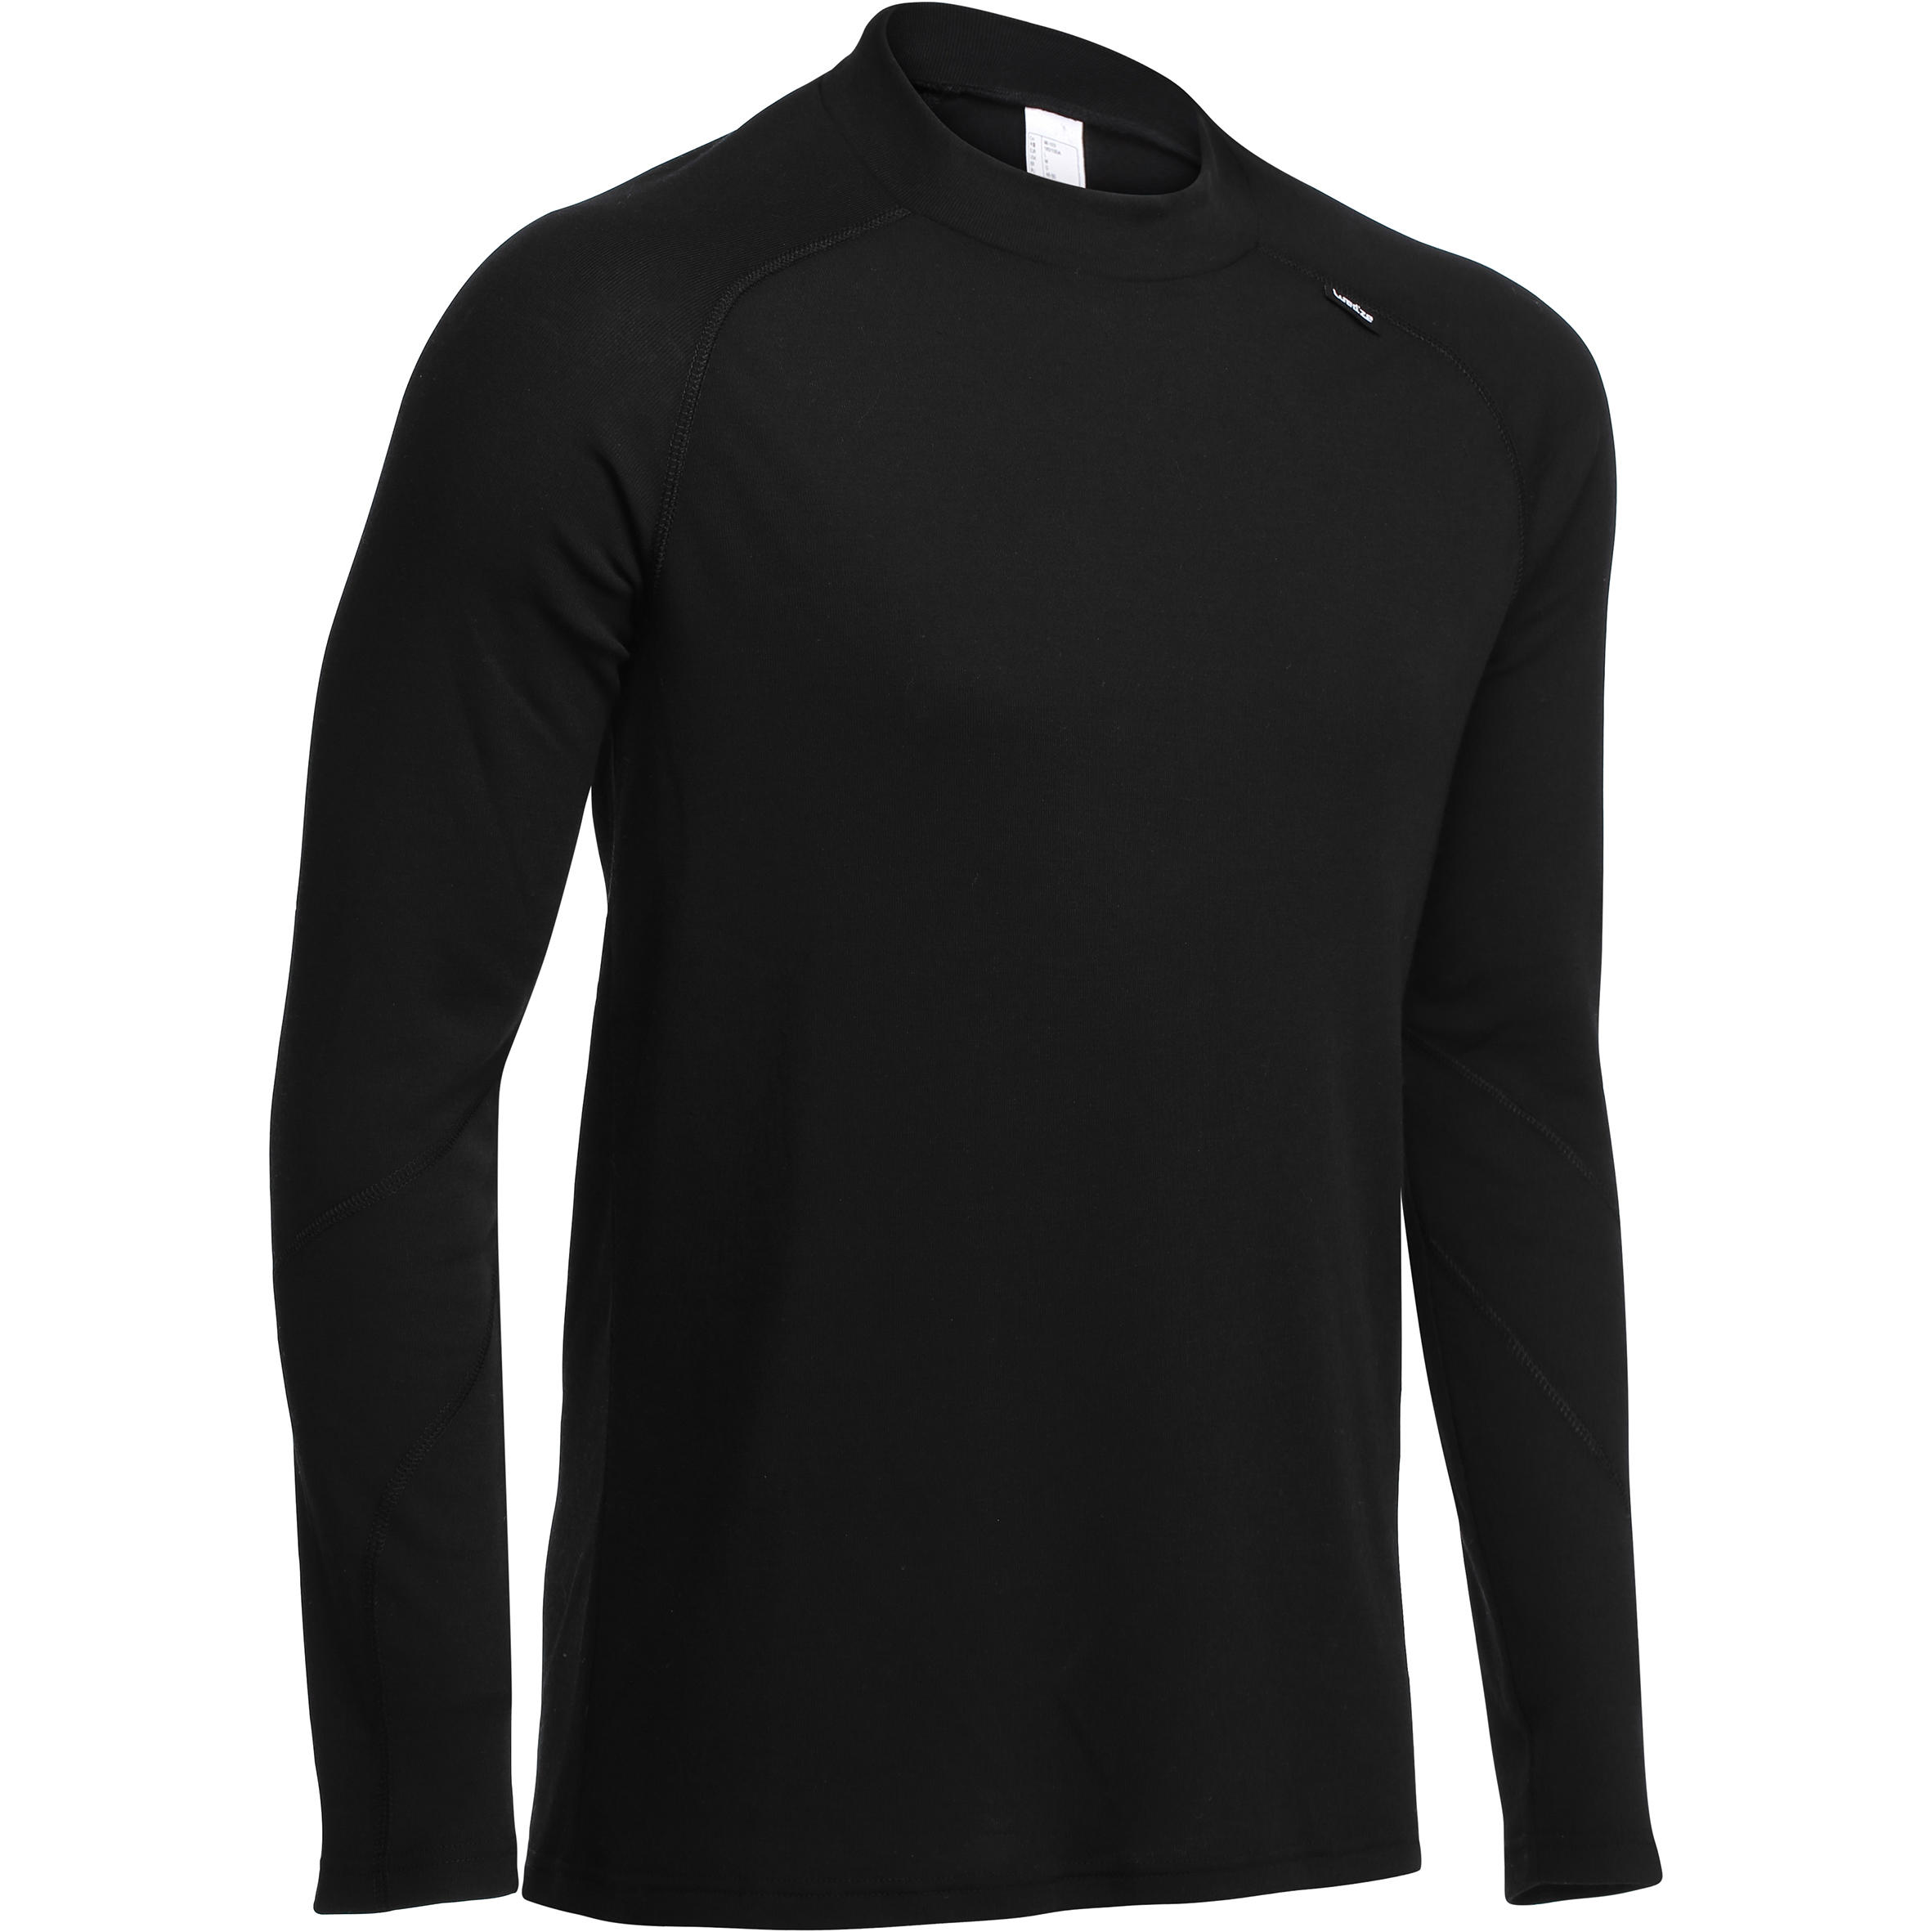 Thermals - Buy Thermal Wear for Men 